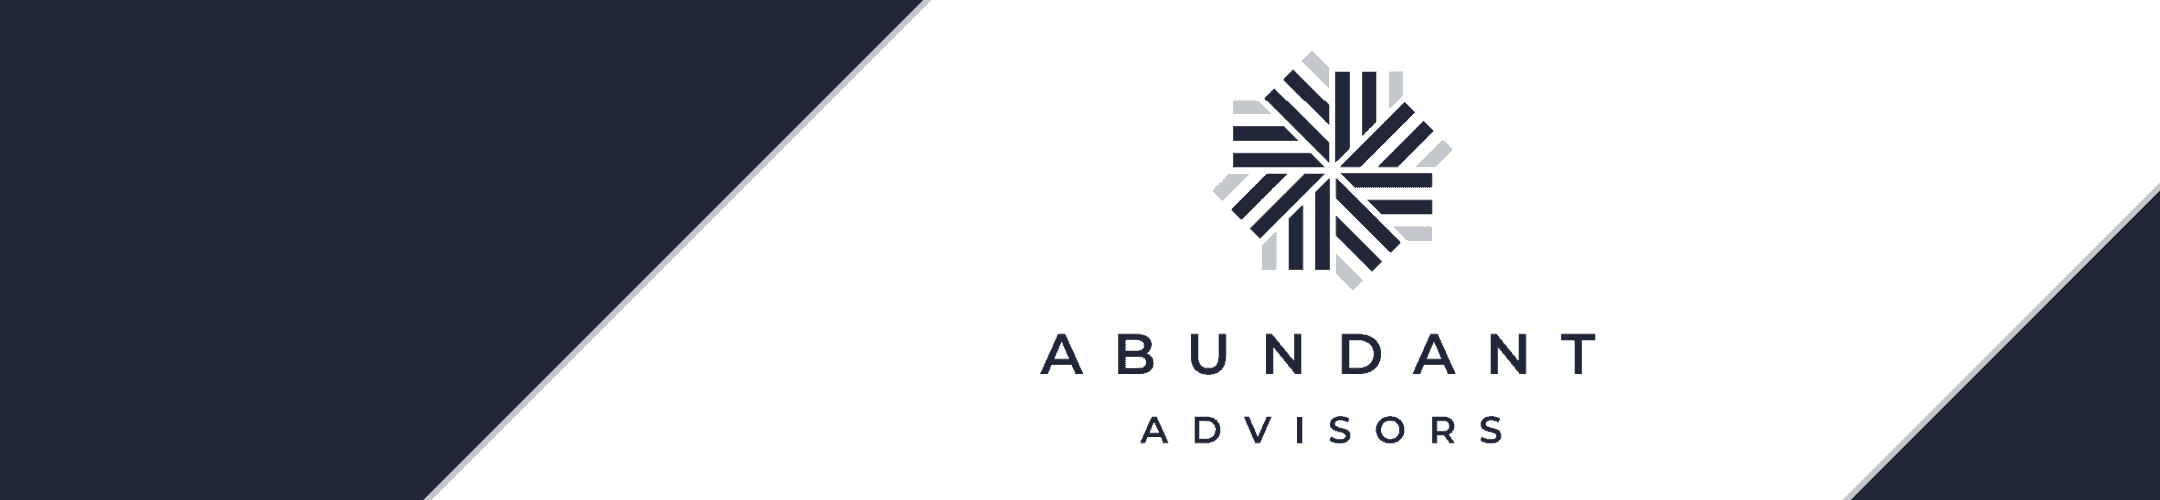 An elegant, minimalist business banner for a company named 'abundant advisors' with a symmetrical, star-like logo in a grayscale color palette.